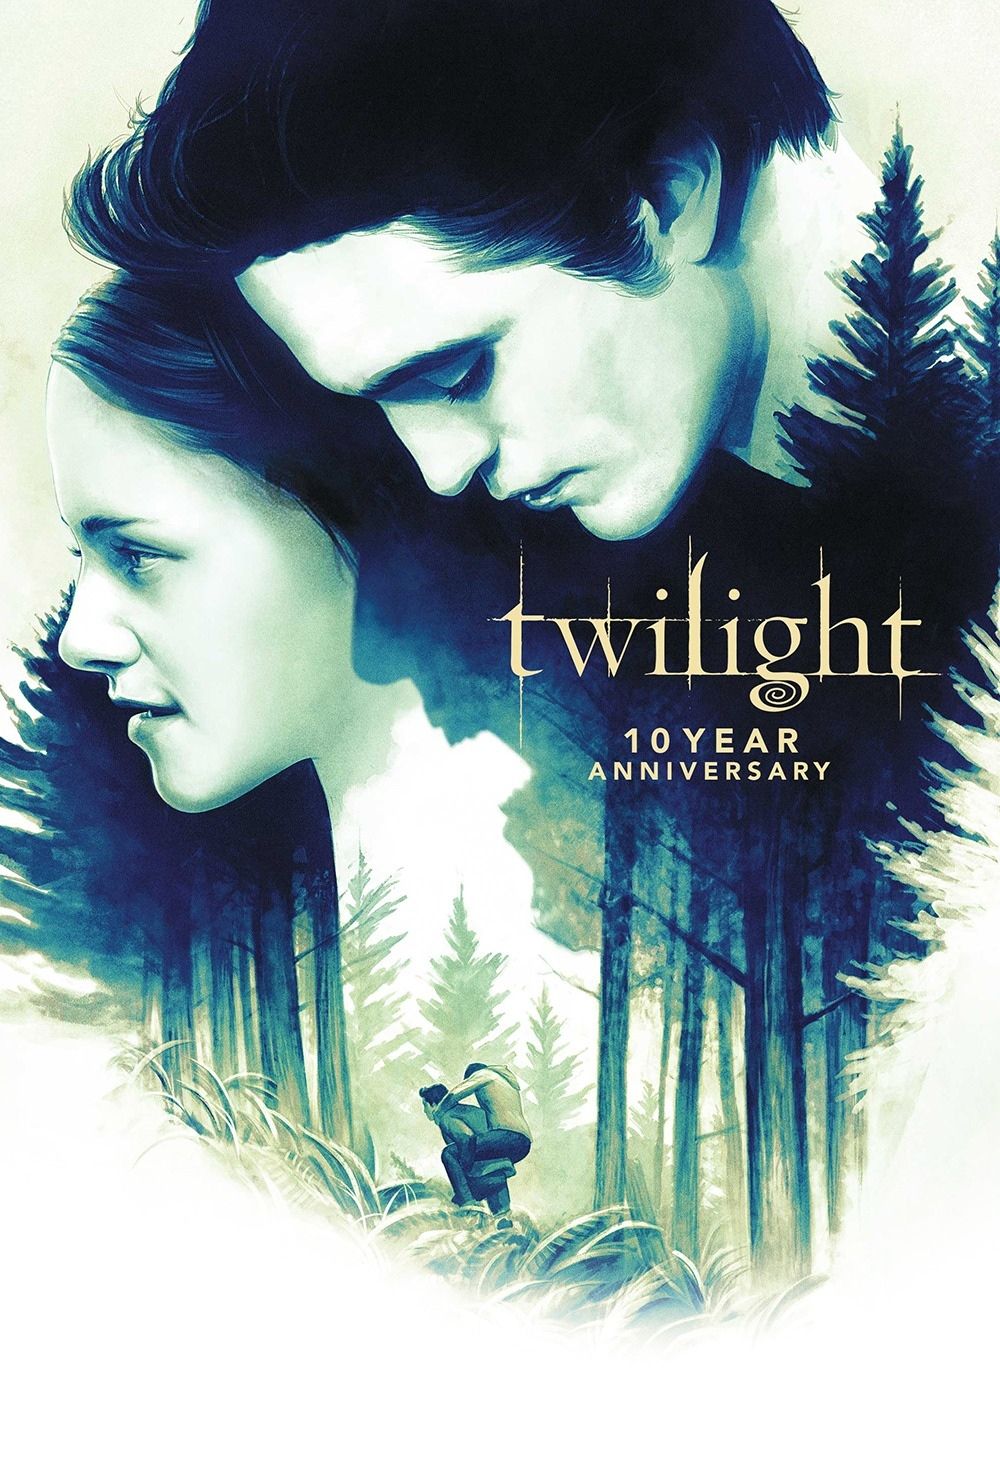 Twilight Is Returning to Theaters to Celebrate 10th Anniversary